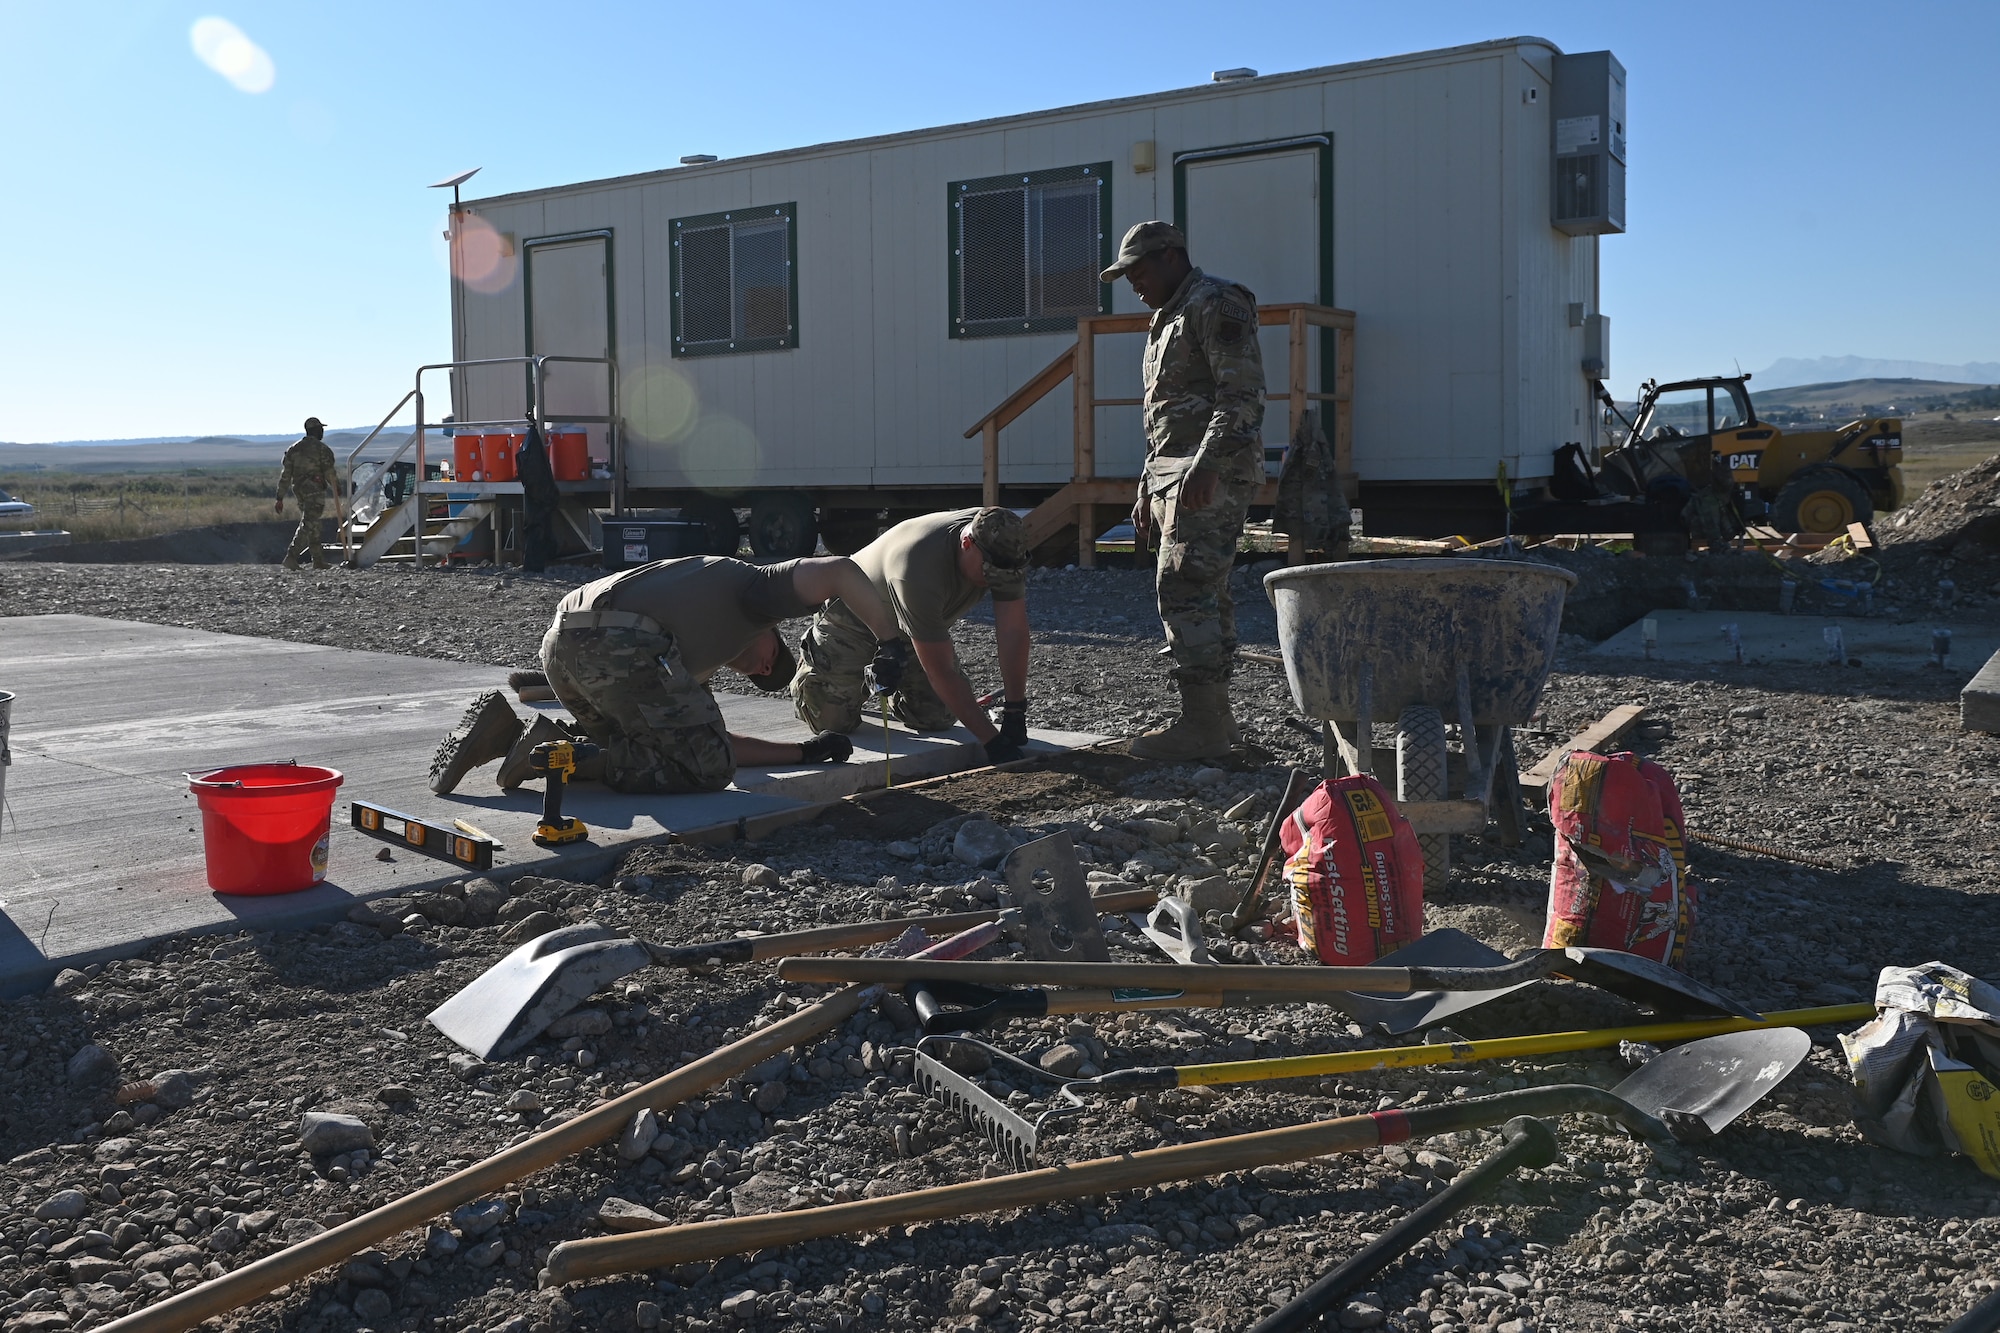 U.S. Air Force Airmen assigned to the 169th Civil Engineer Squadron from the South Carolina Air National Guard make concrete repairs to help build a community center for the Blackfeet Nation Native Americans at Heart Butte, Montana, September 6, 2022. This temporary deployment is part of the 169th Civil Engineer Squadron’s yearly Innovative Readiness Training (IRT) that helps Airmen train in a real-world environment to acquire and maintain their trade skills. (U.S. Air National Guard photo by Airman 1st Class Amy Rangel, 169th Fighter Wing Public Affairs)